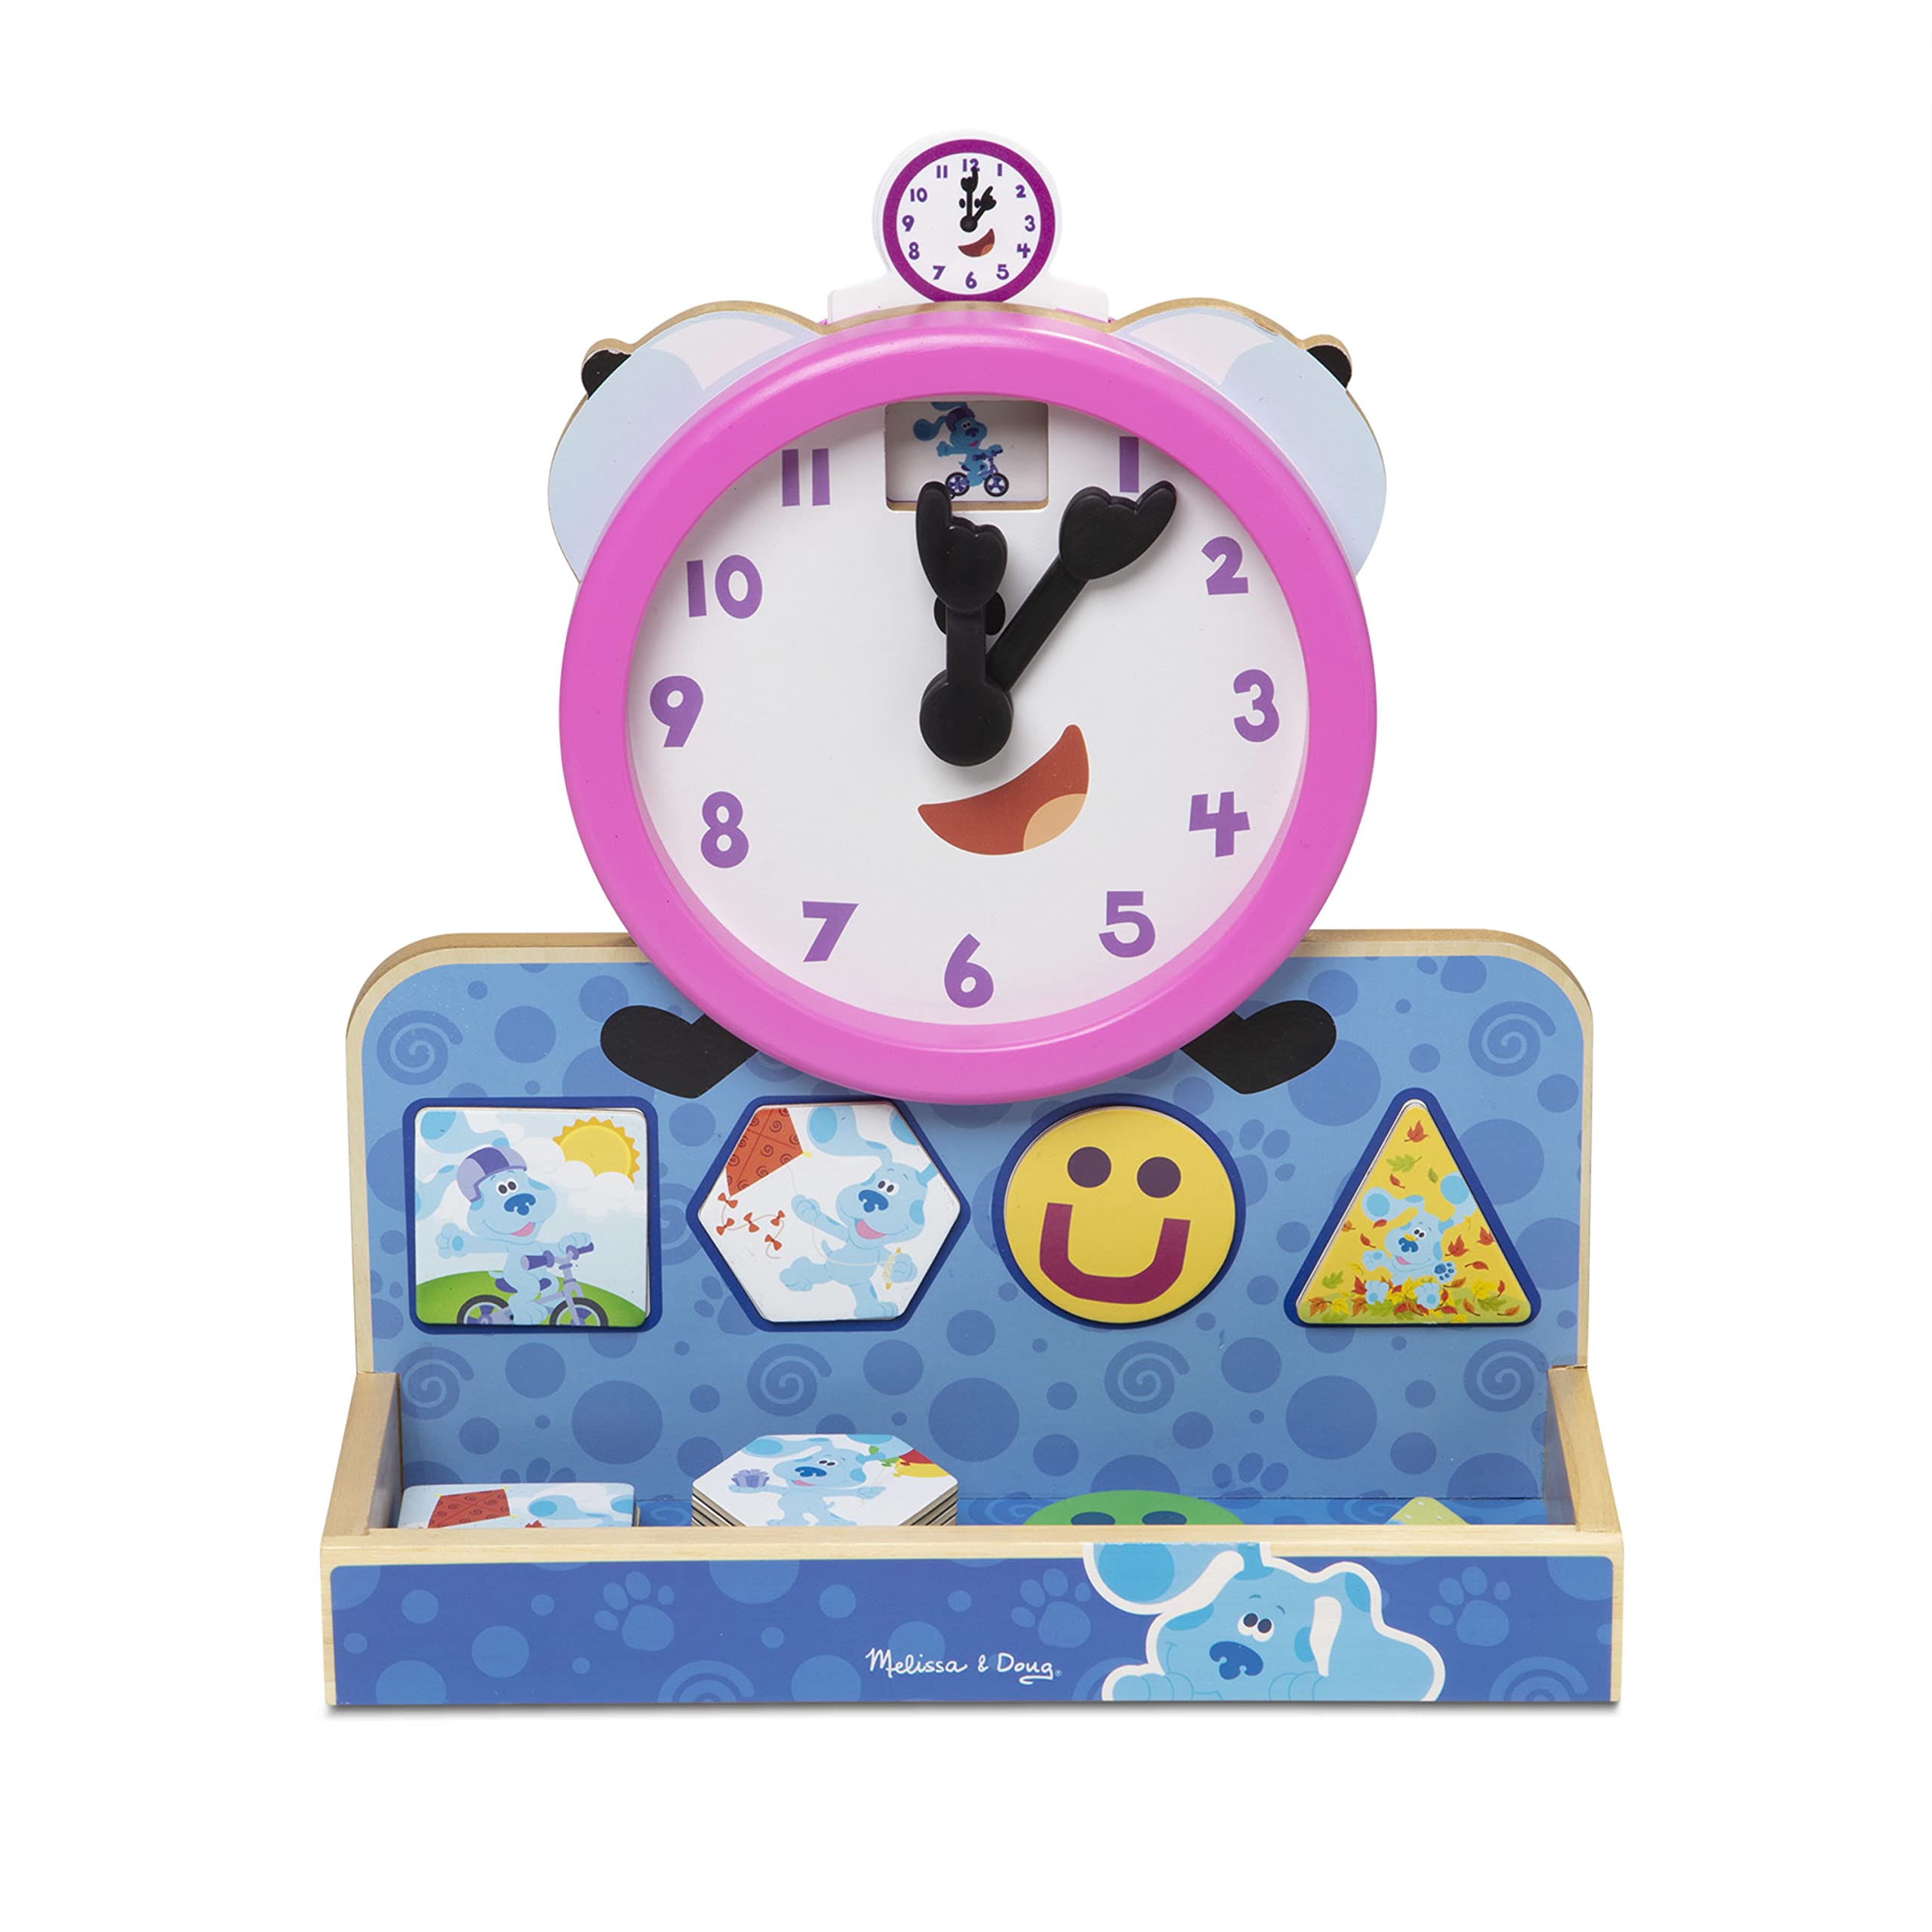 Melissa & Doug Blue's Clues & You! Wooden Tickety Tock Magnetic Clock (31 Pieces)